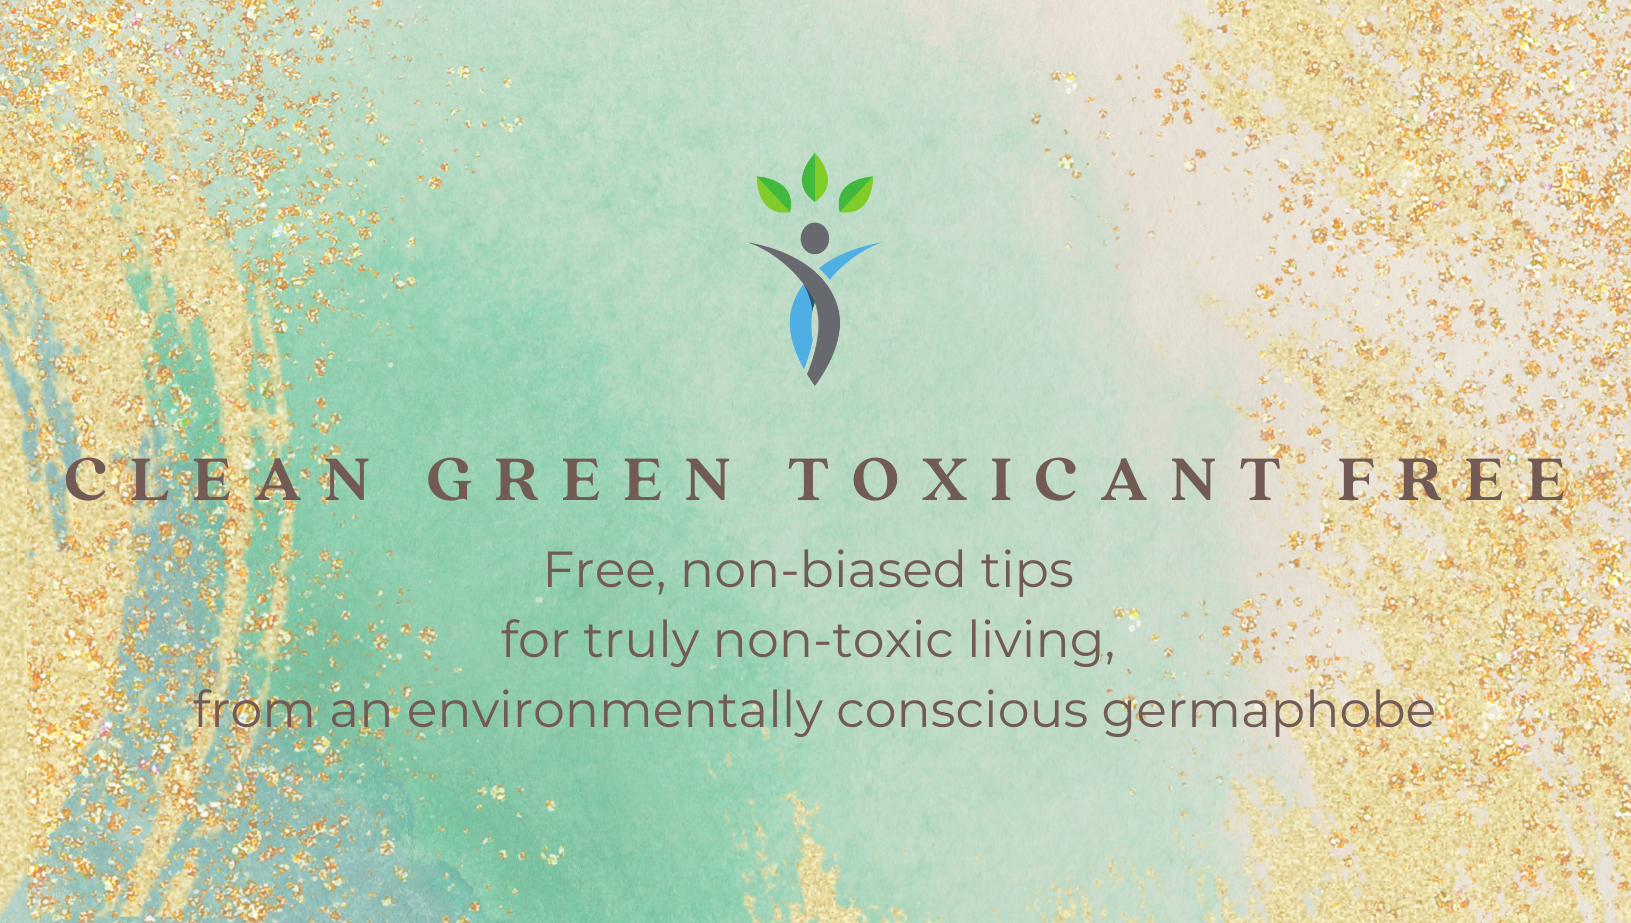 Clean Green Toxicant Free - Free, non-biased tips for *truly* non-toxic living, from an environmentally conscious germaphobe